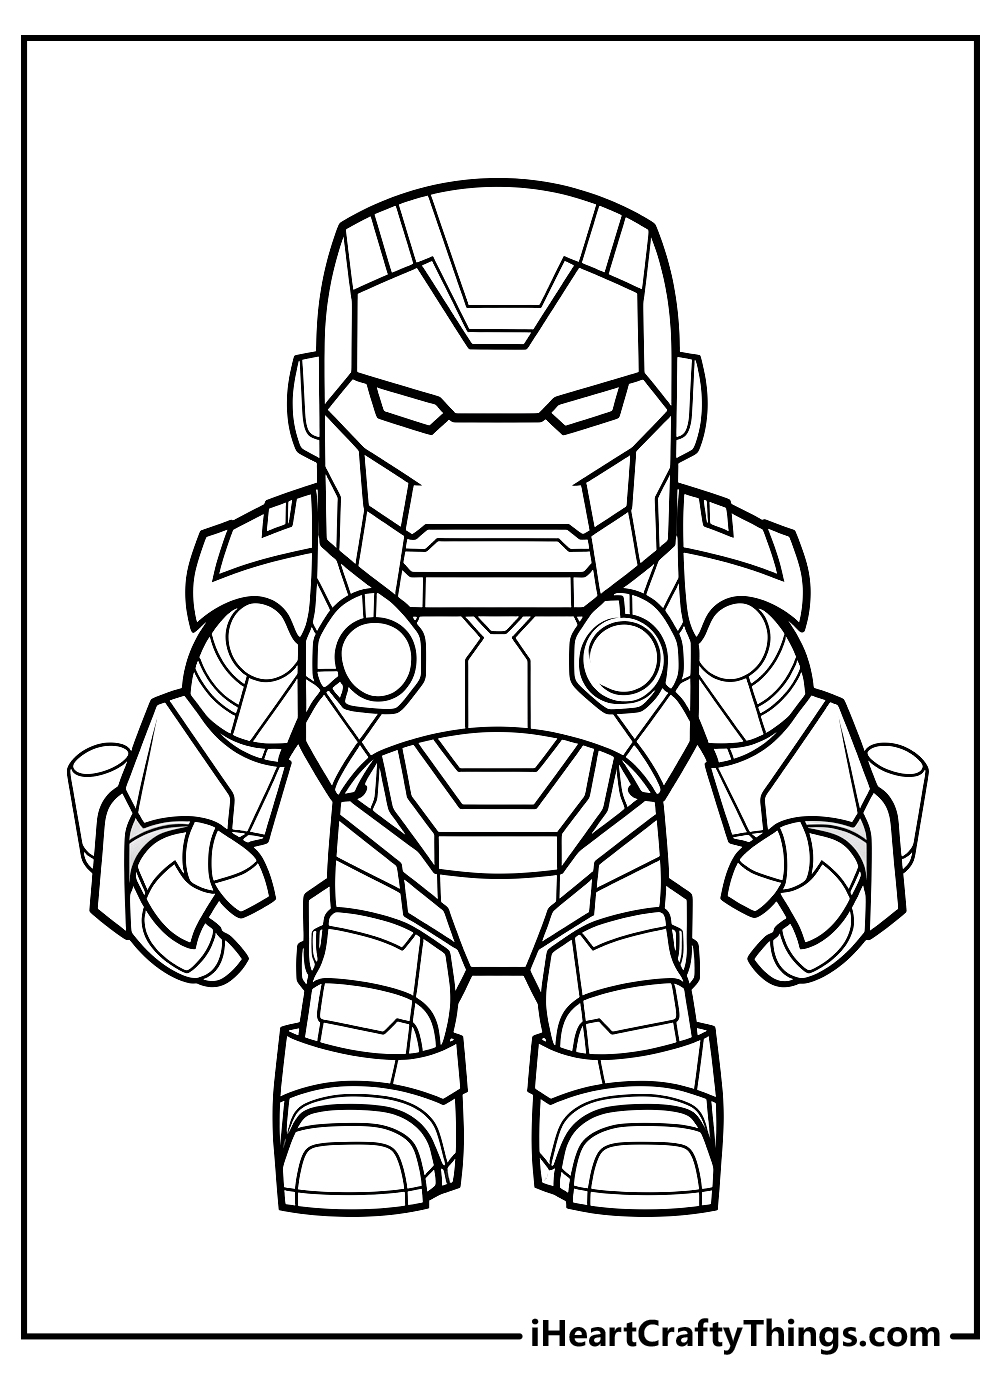 The Armored Avenger Ironman coloring printable